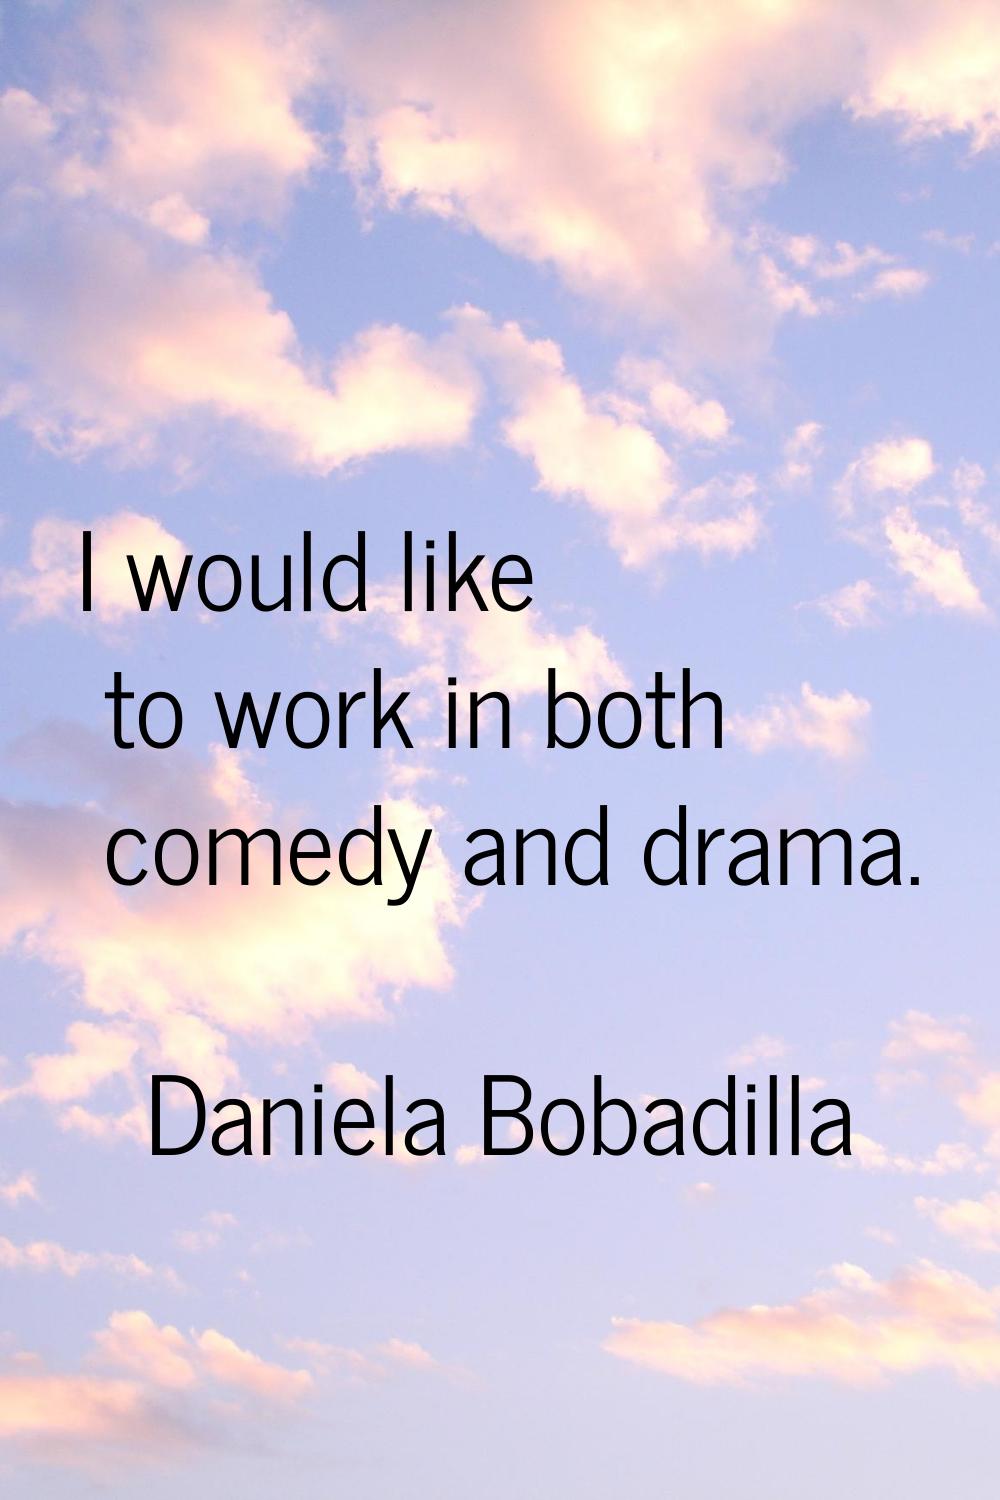 I would like to work in both comedy and drama.